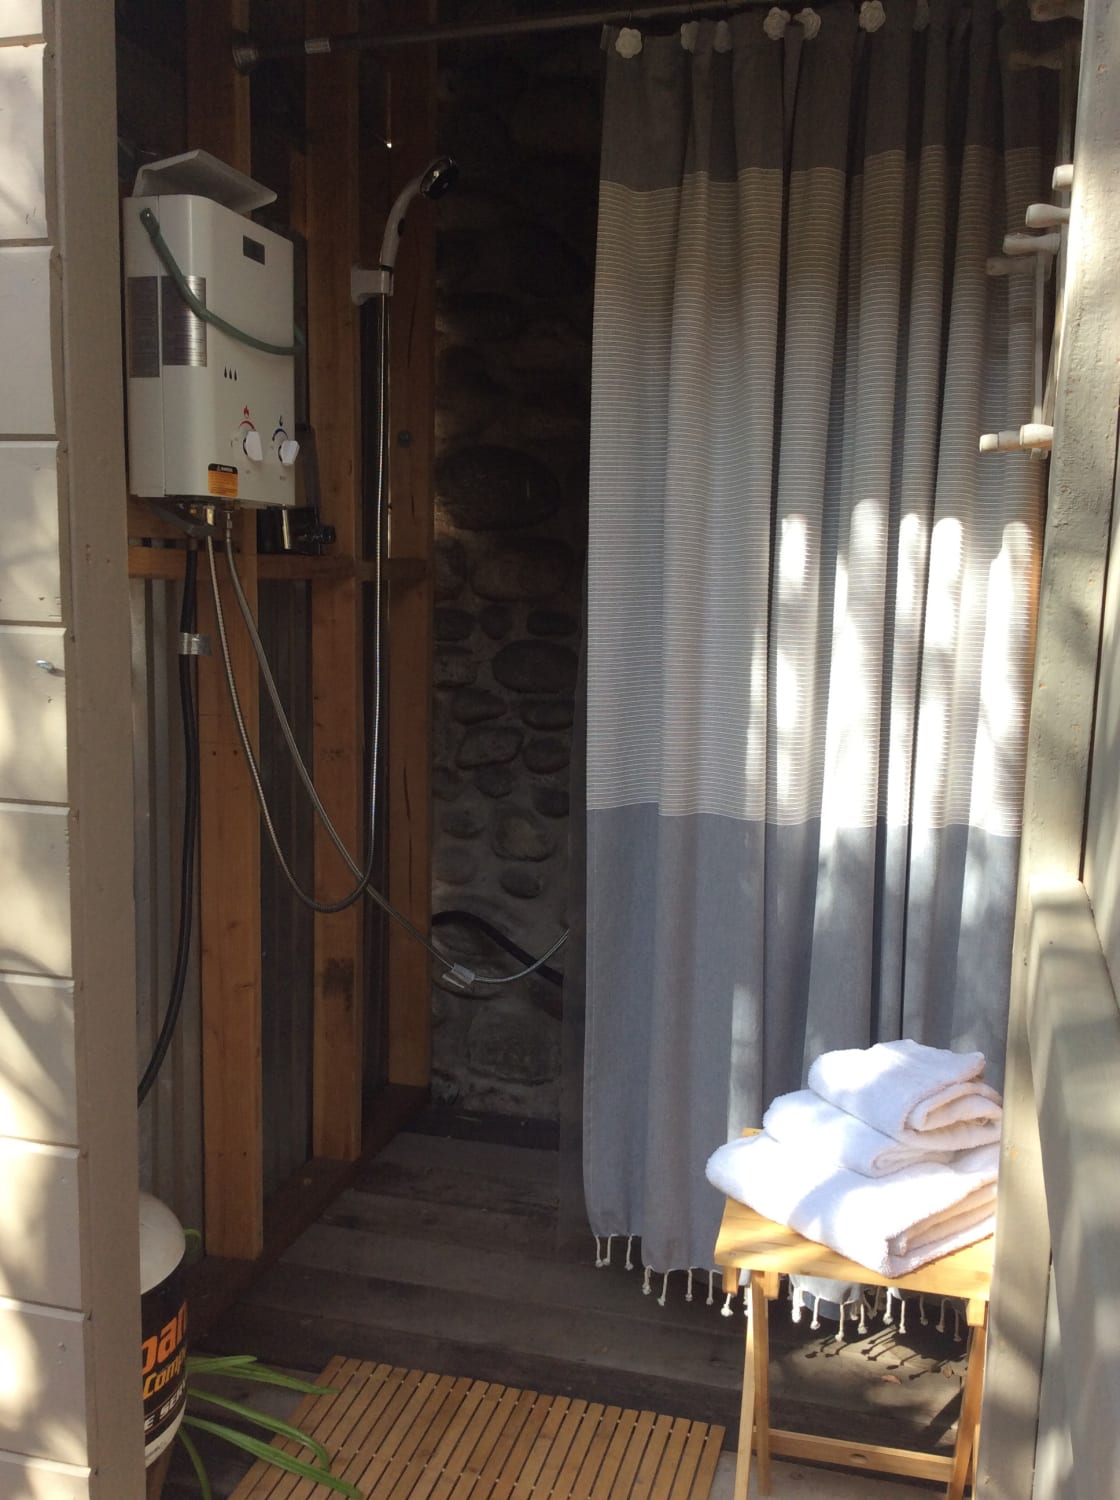 Outdoor, but enclosed, shower area with portable water-heating tank. This area is less than 10 feet from the tent.